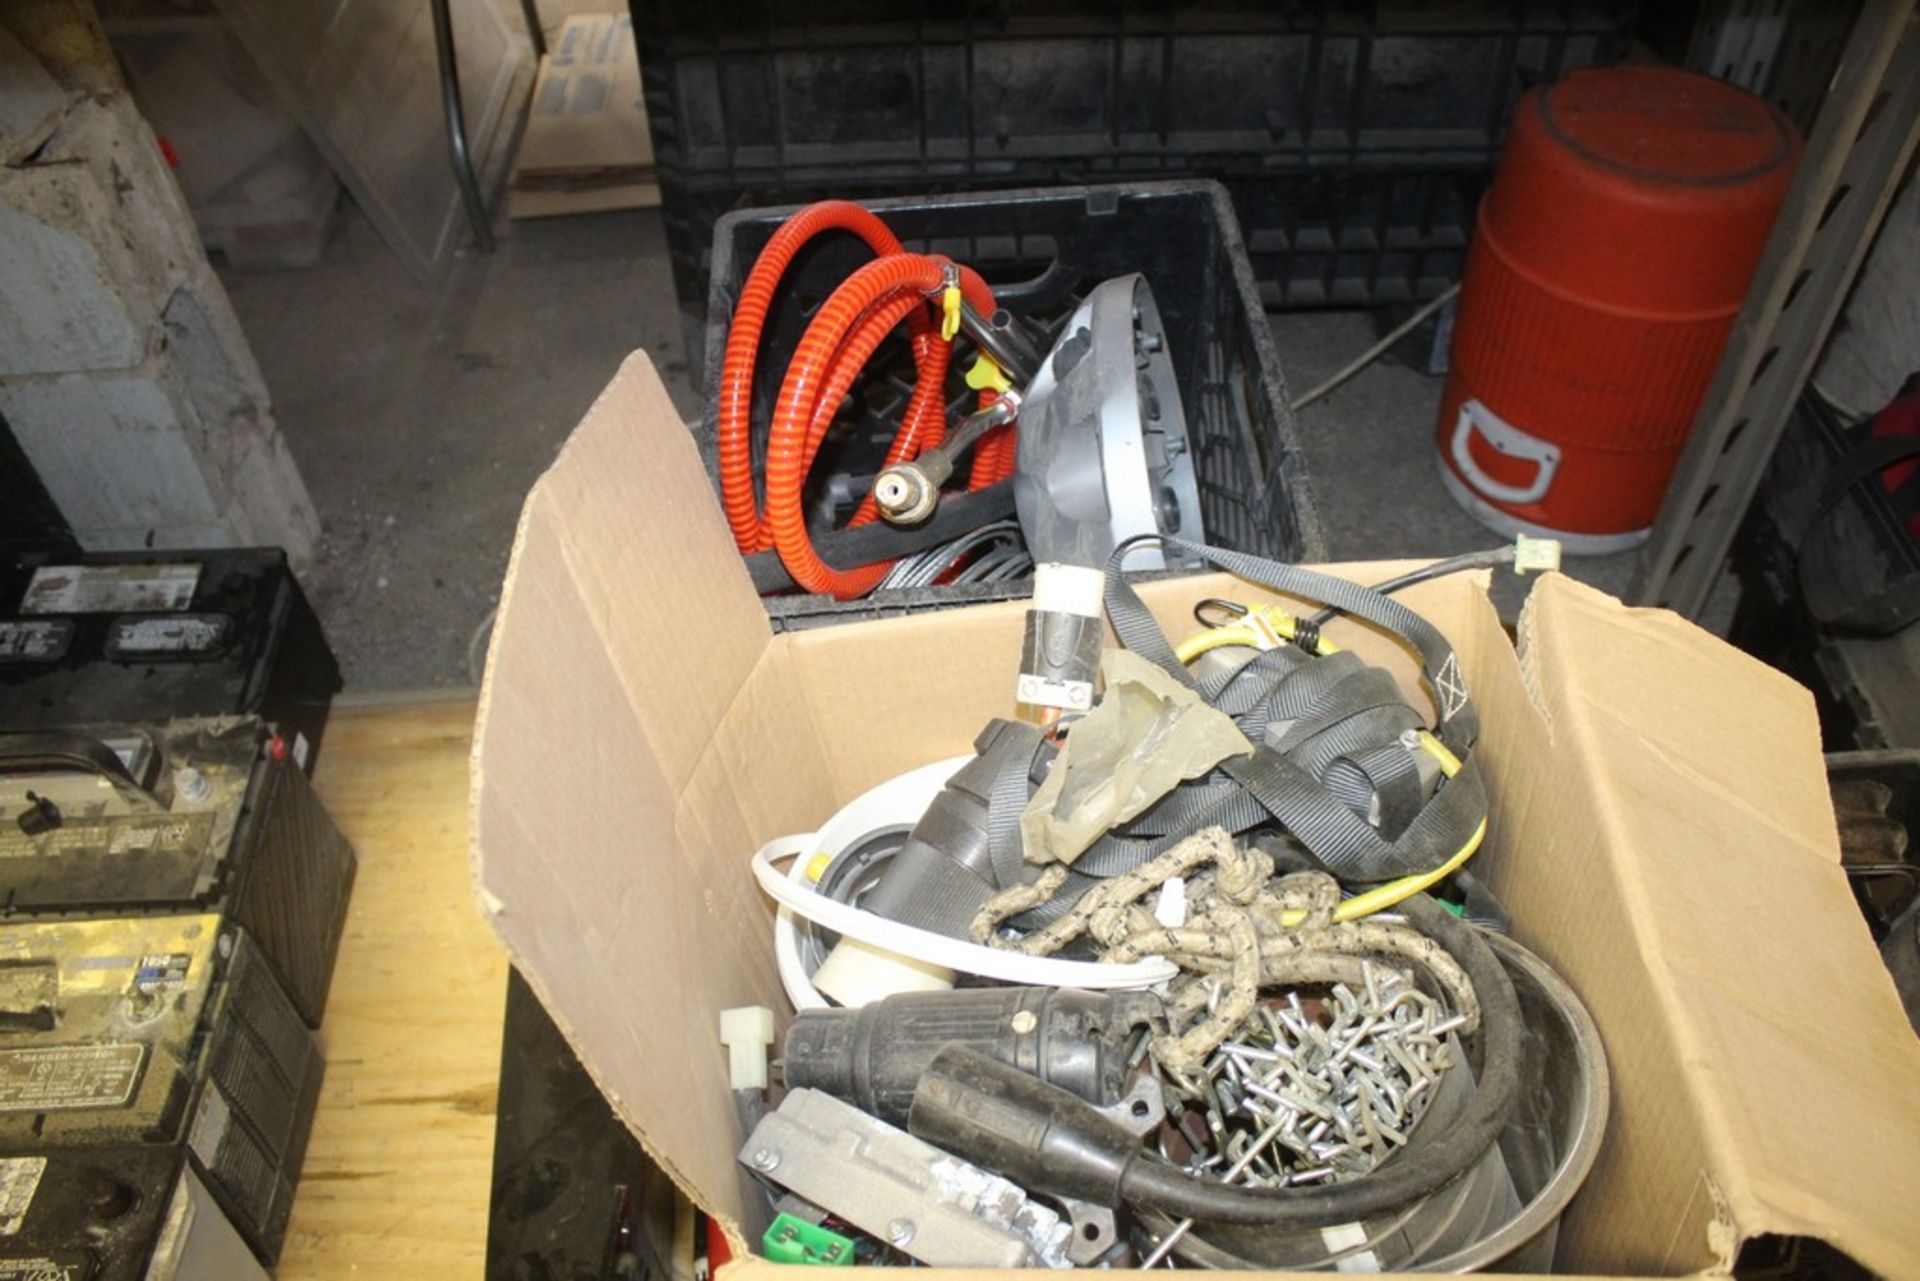 ASSORTED TRAILER PARTS IN CRATES - Image 2 of 3